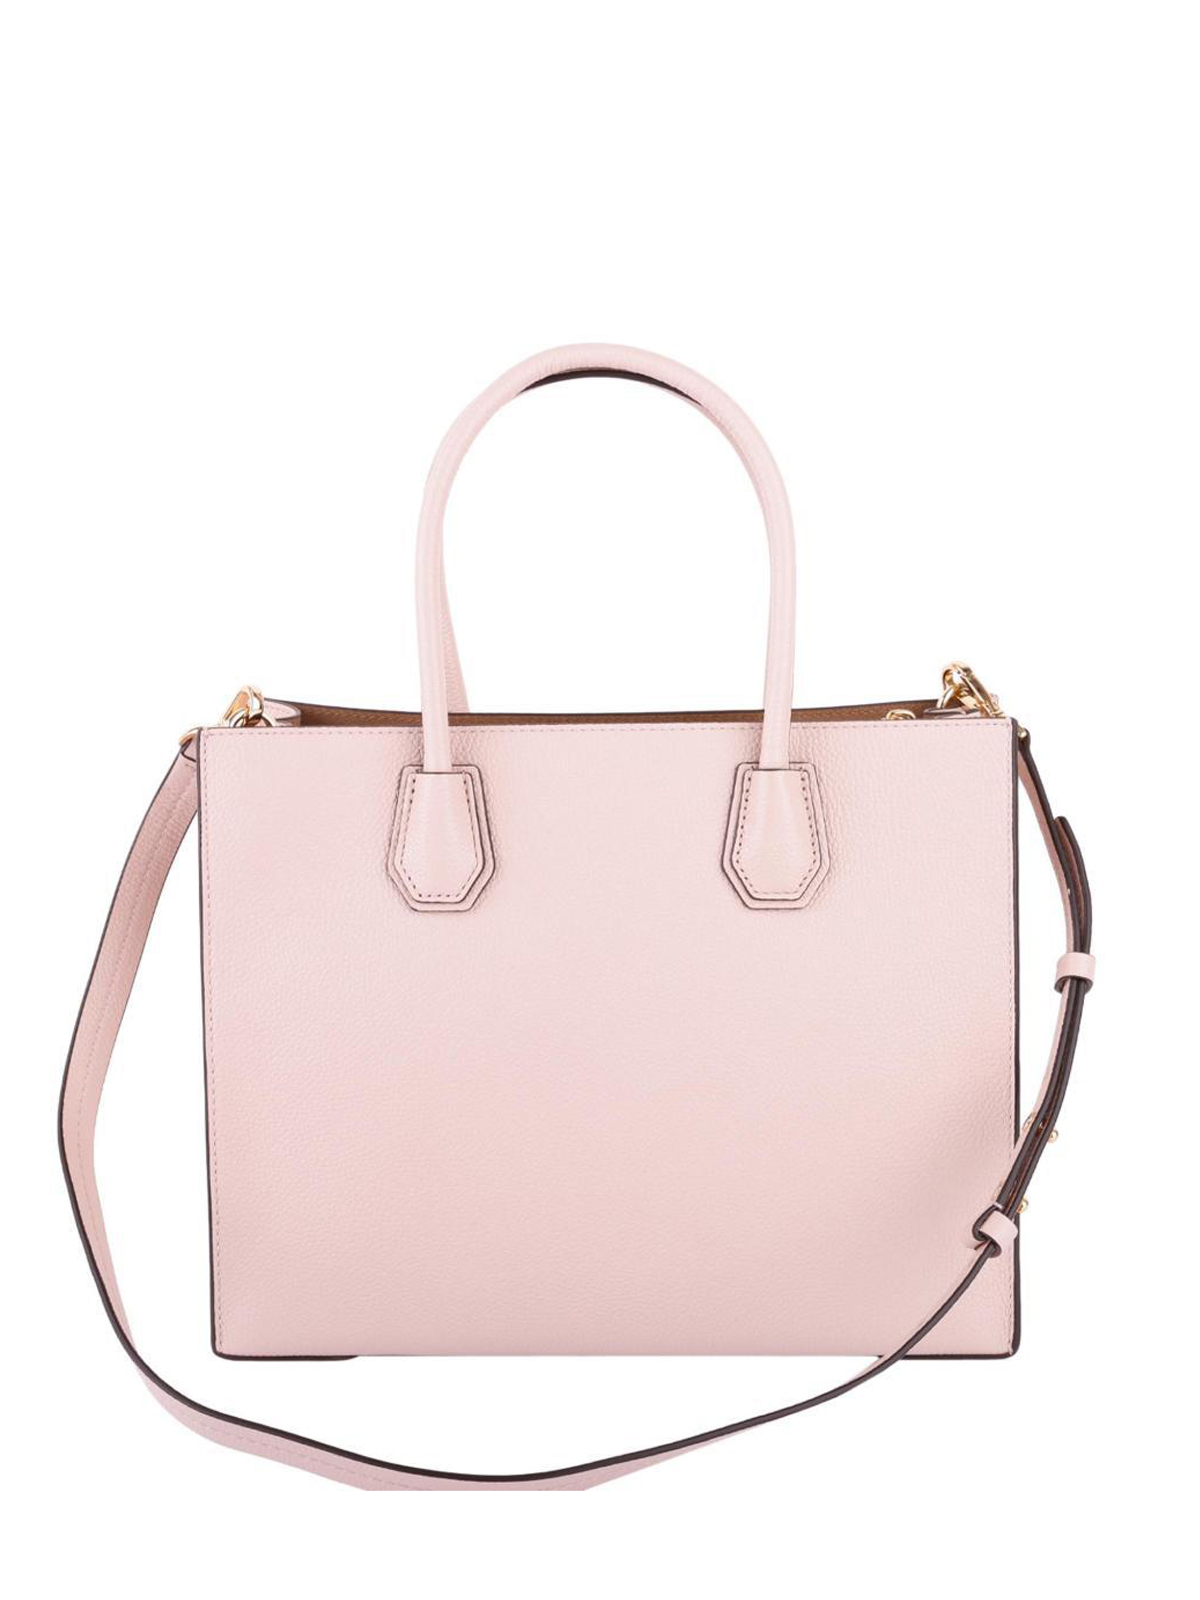 Totes bags Michael Kors - Mercer large soft pink leather tote ...